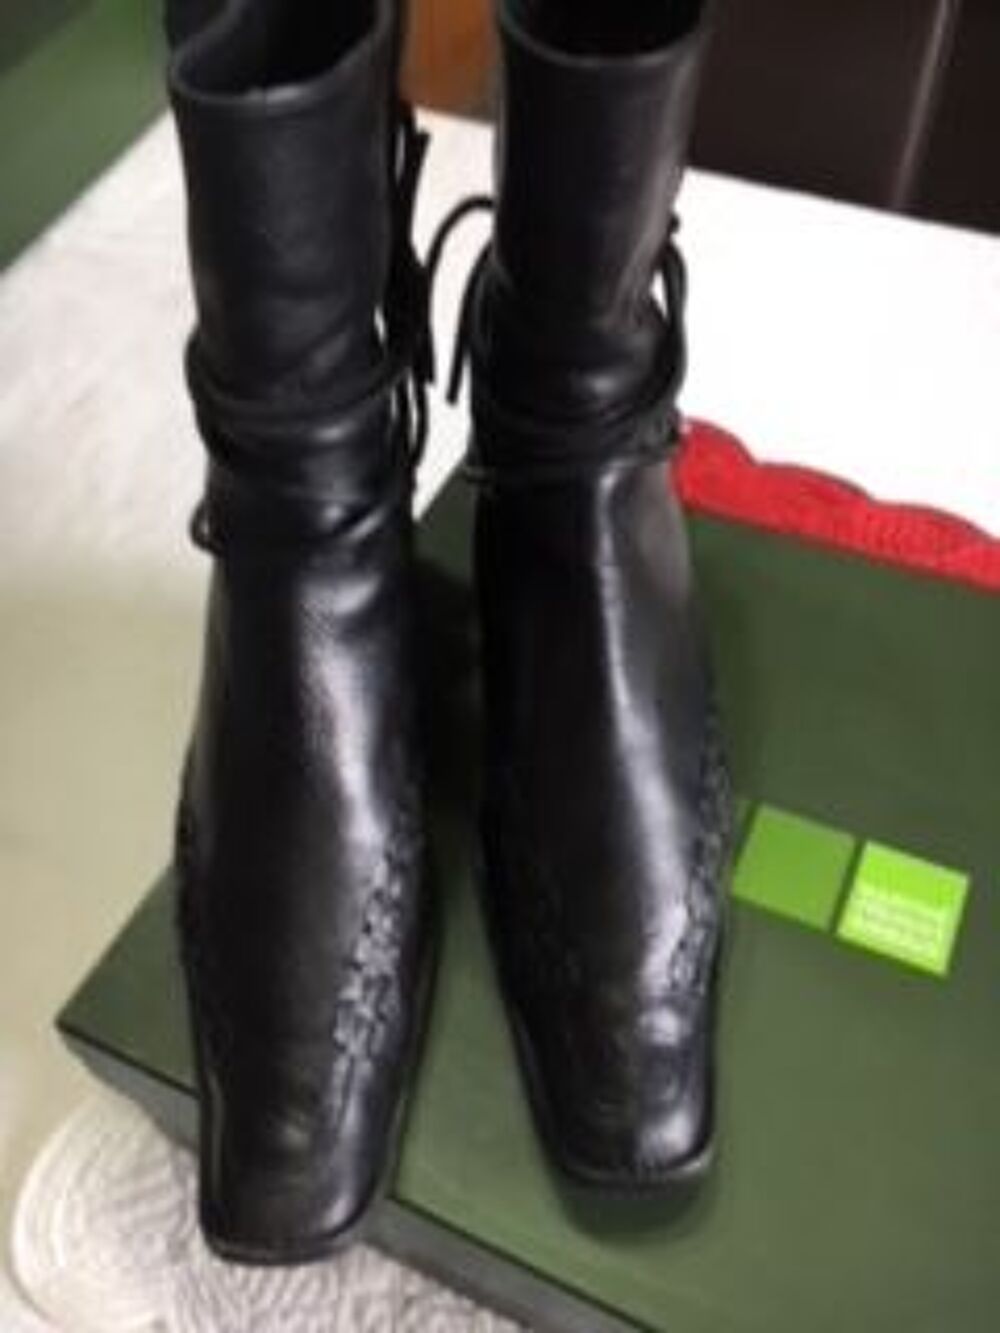 Boots cuir noir Girbaud taille 38 Chaussures